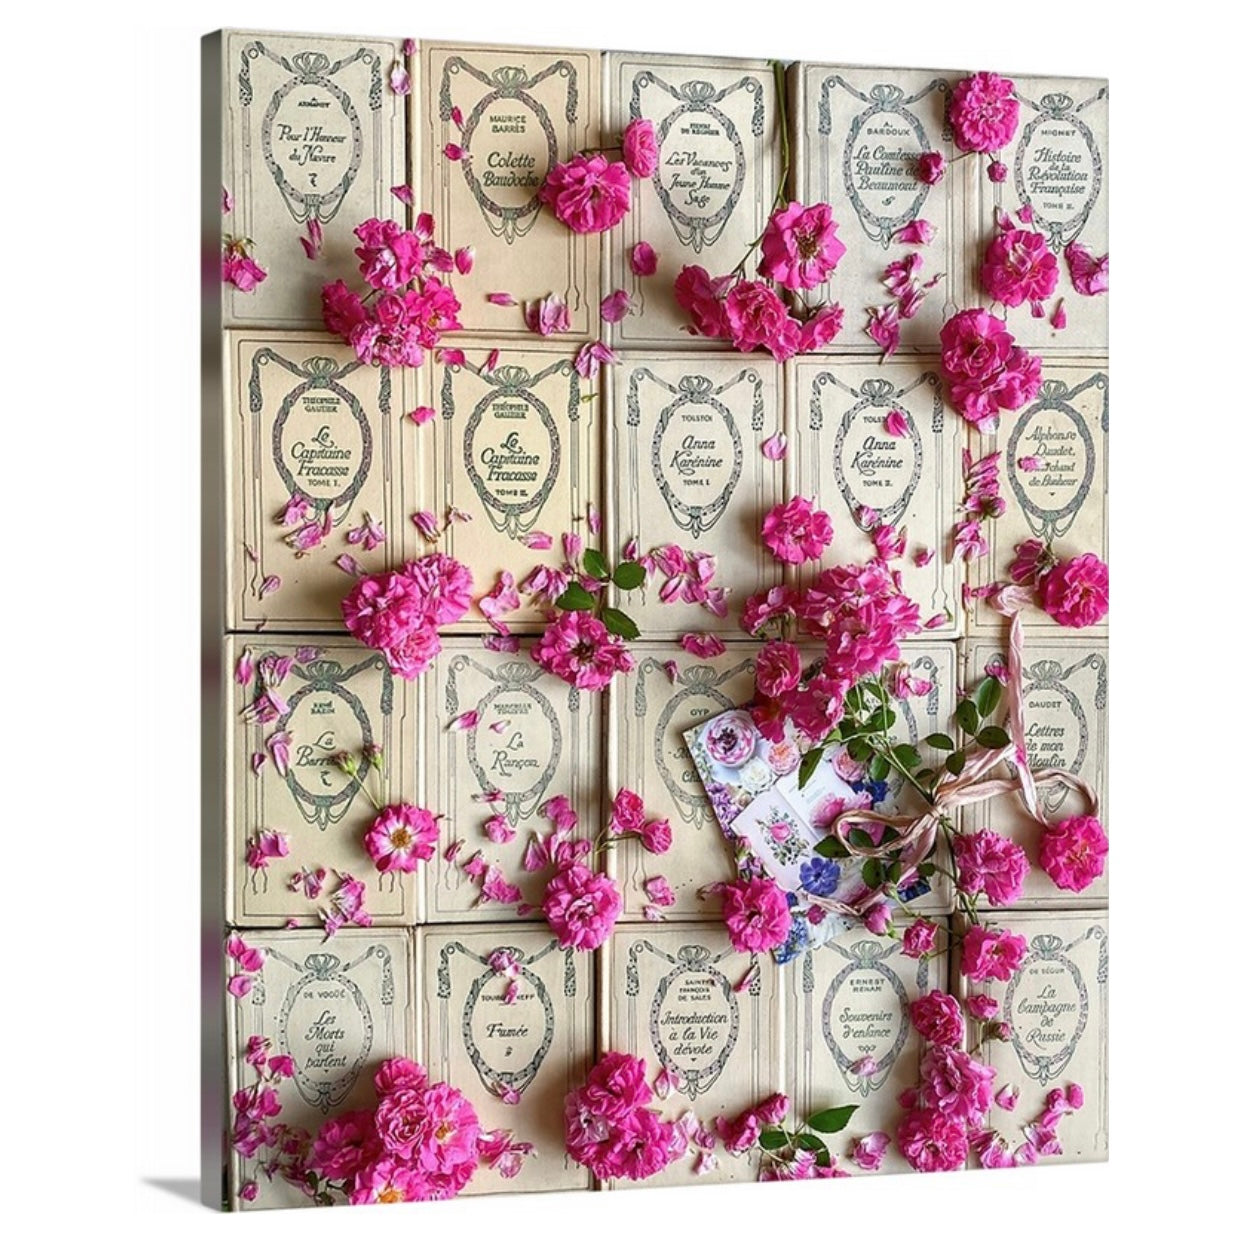 Shabby Chic French Books with Roses Gallery Wrapped Canvas